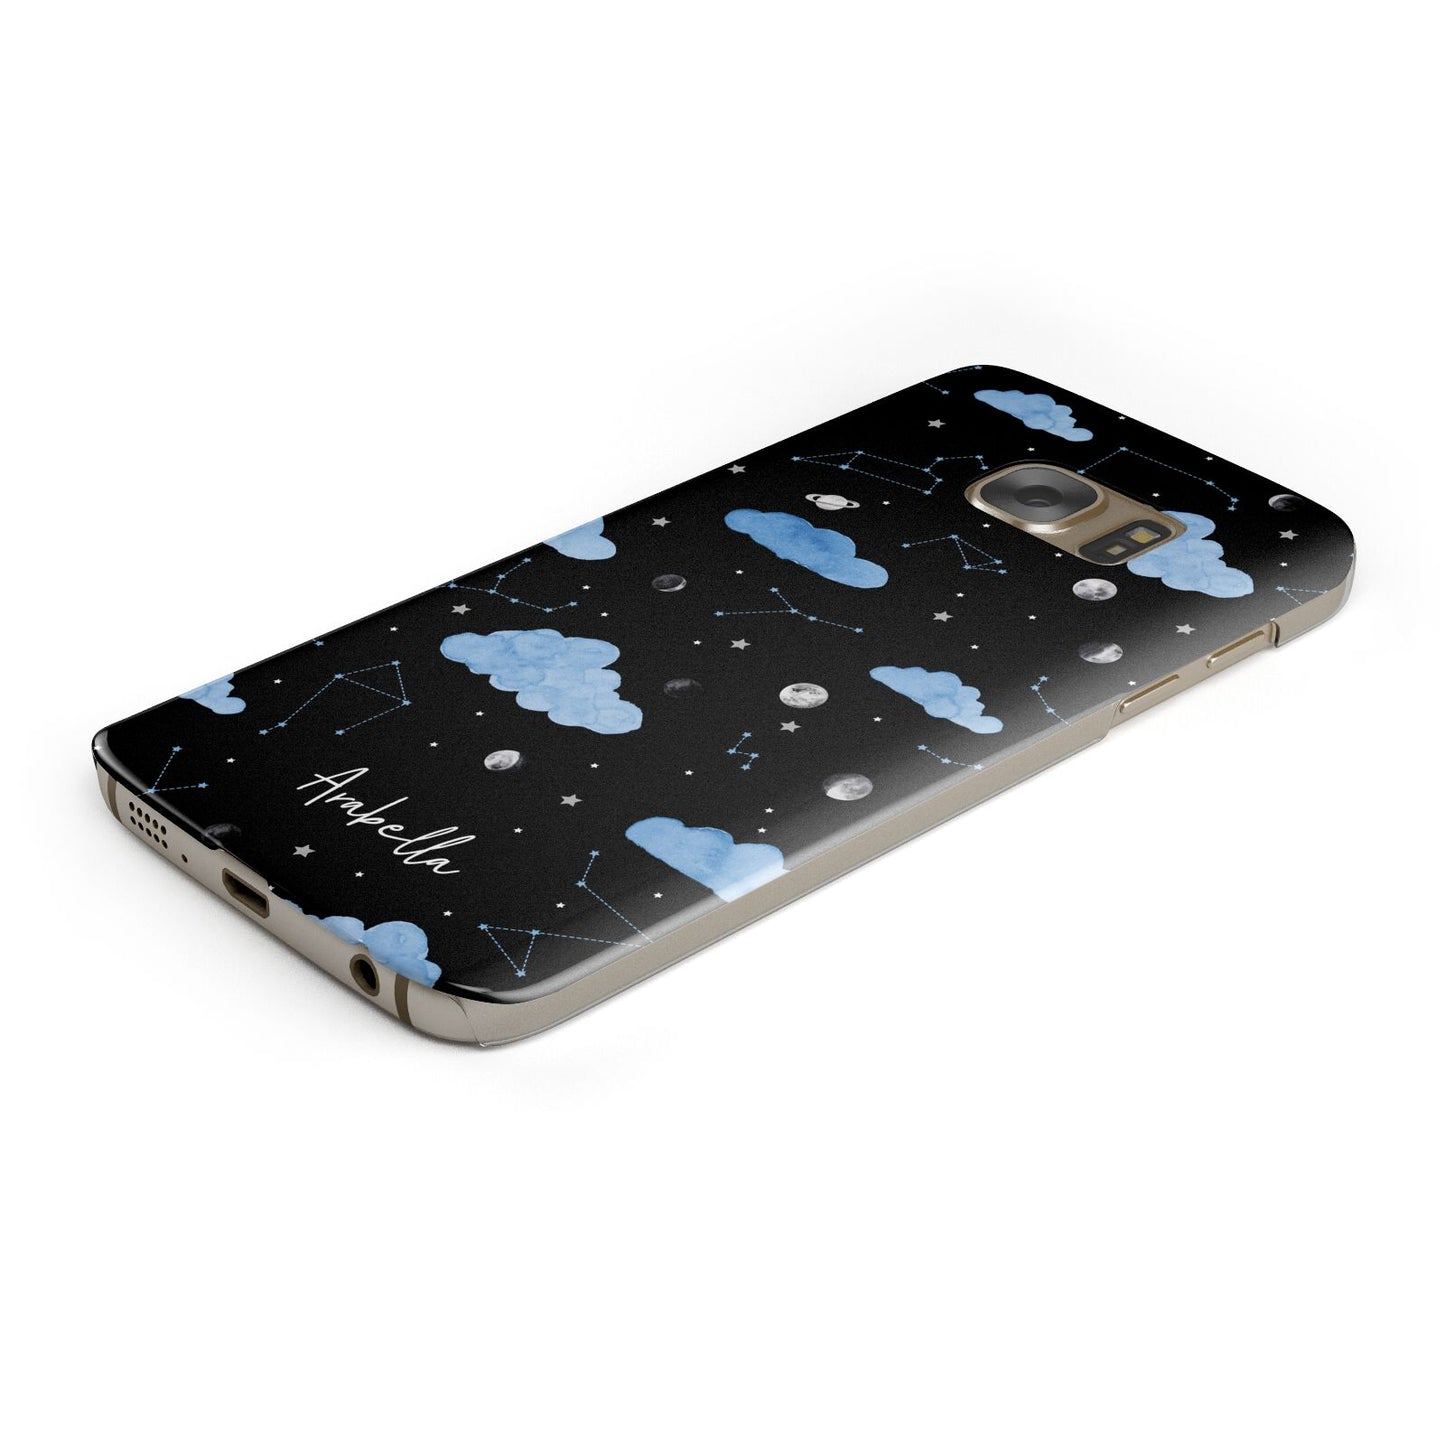 Cloudy Night Sky with Name Samsung Galaxy Case Bottom Cutout